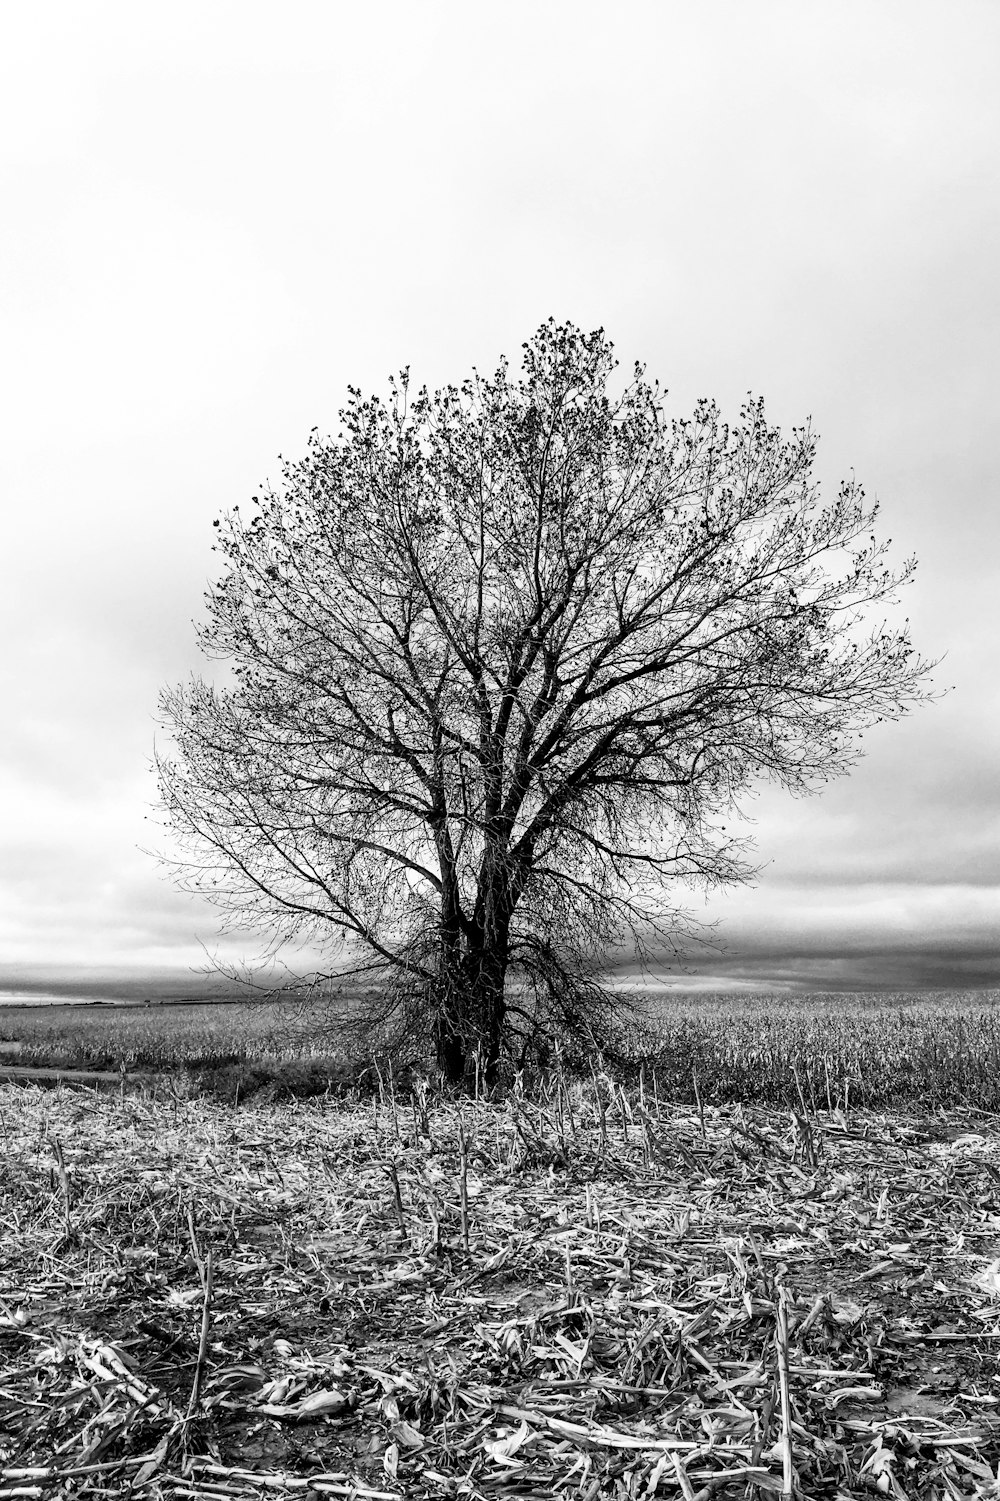 grayscale photo of leafless tree